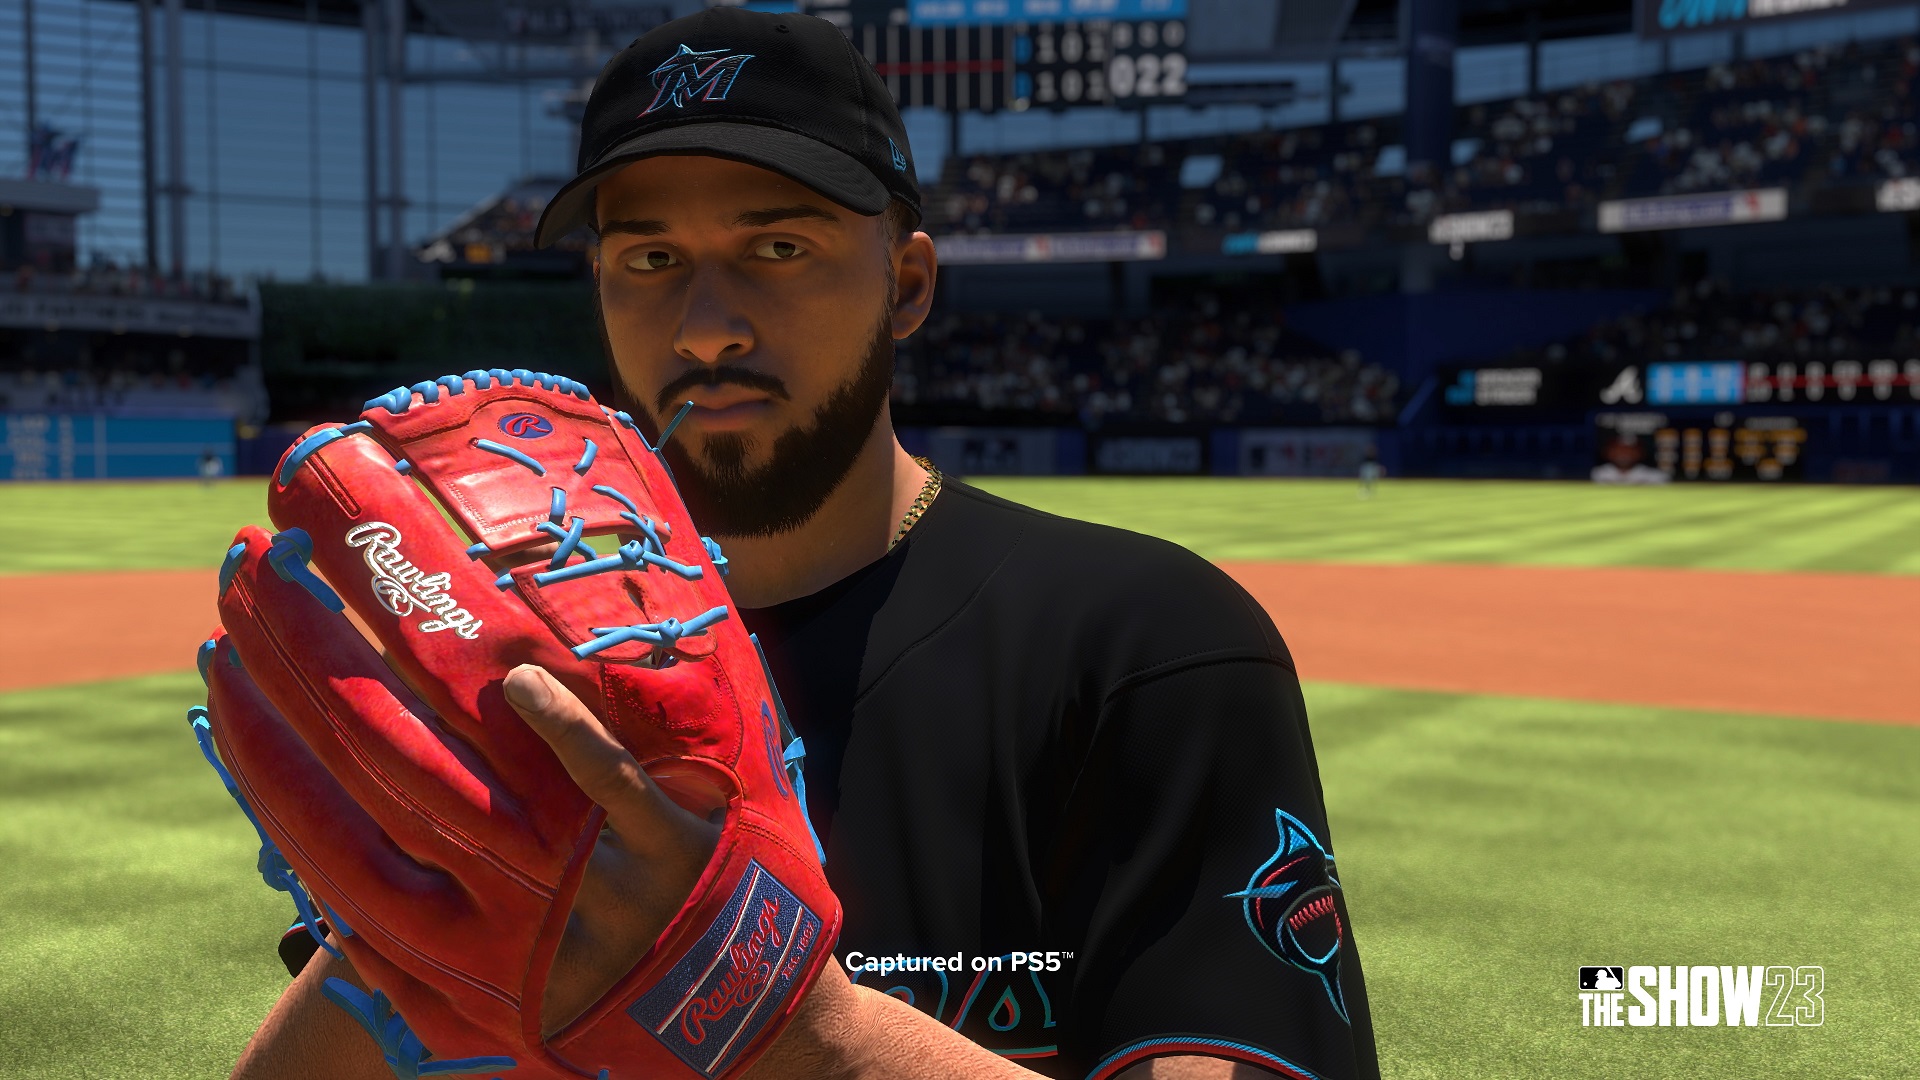 MLB The Show 23 Pitcher